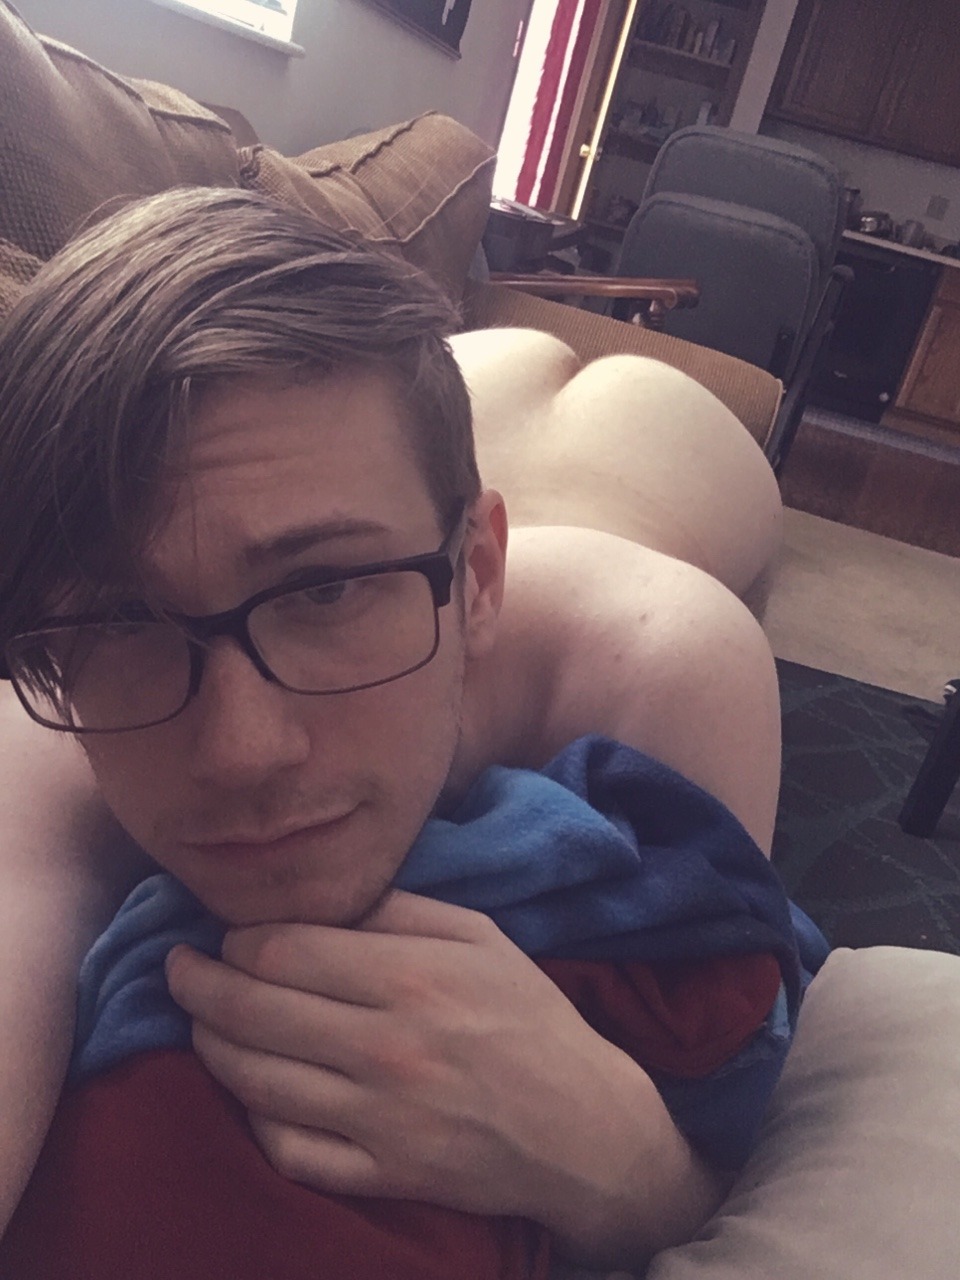 the-trade-mage:  Just the next door boy relaxing on the couch looking for some company